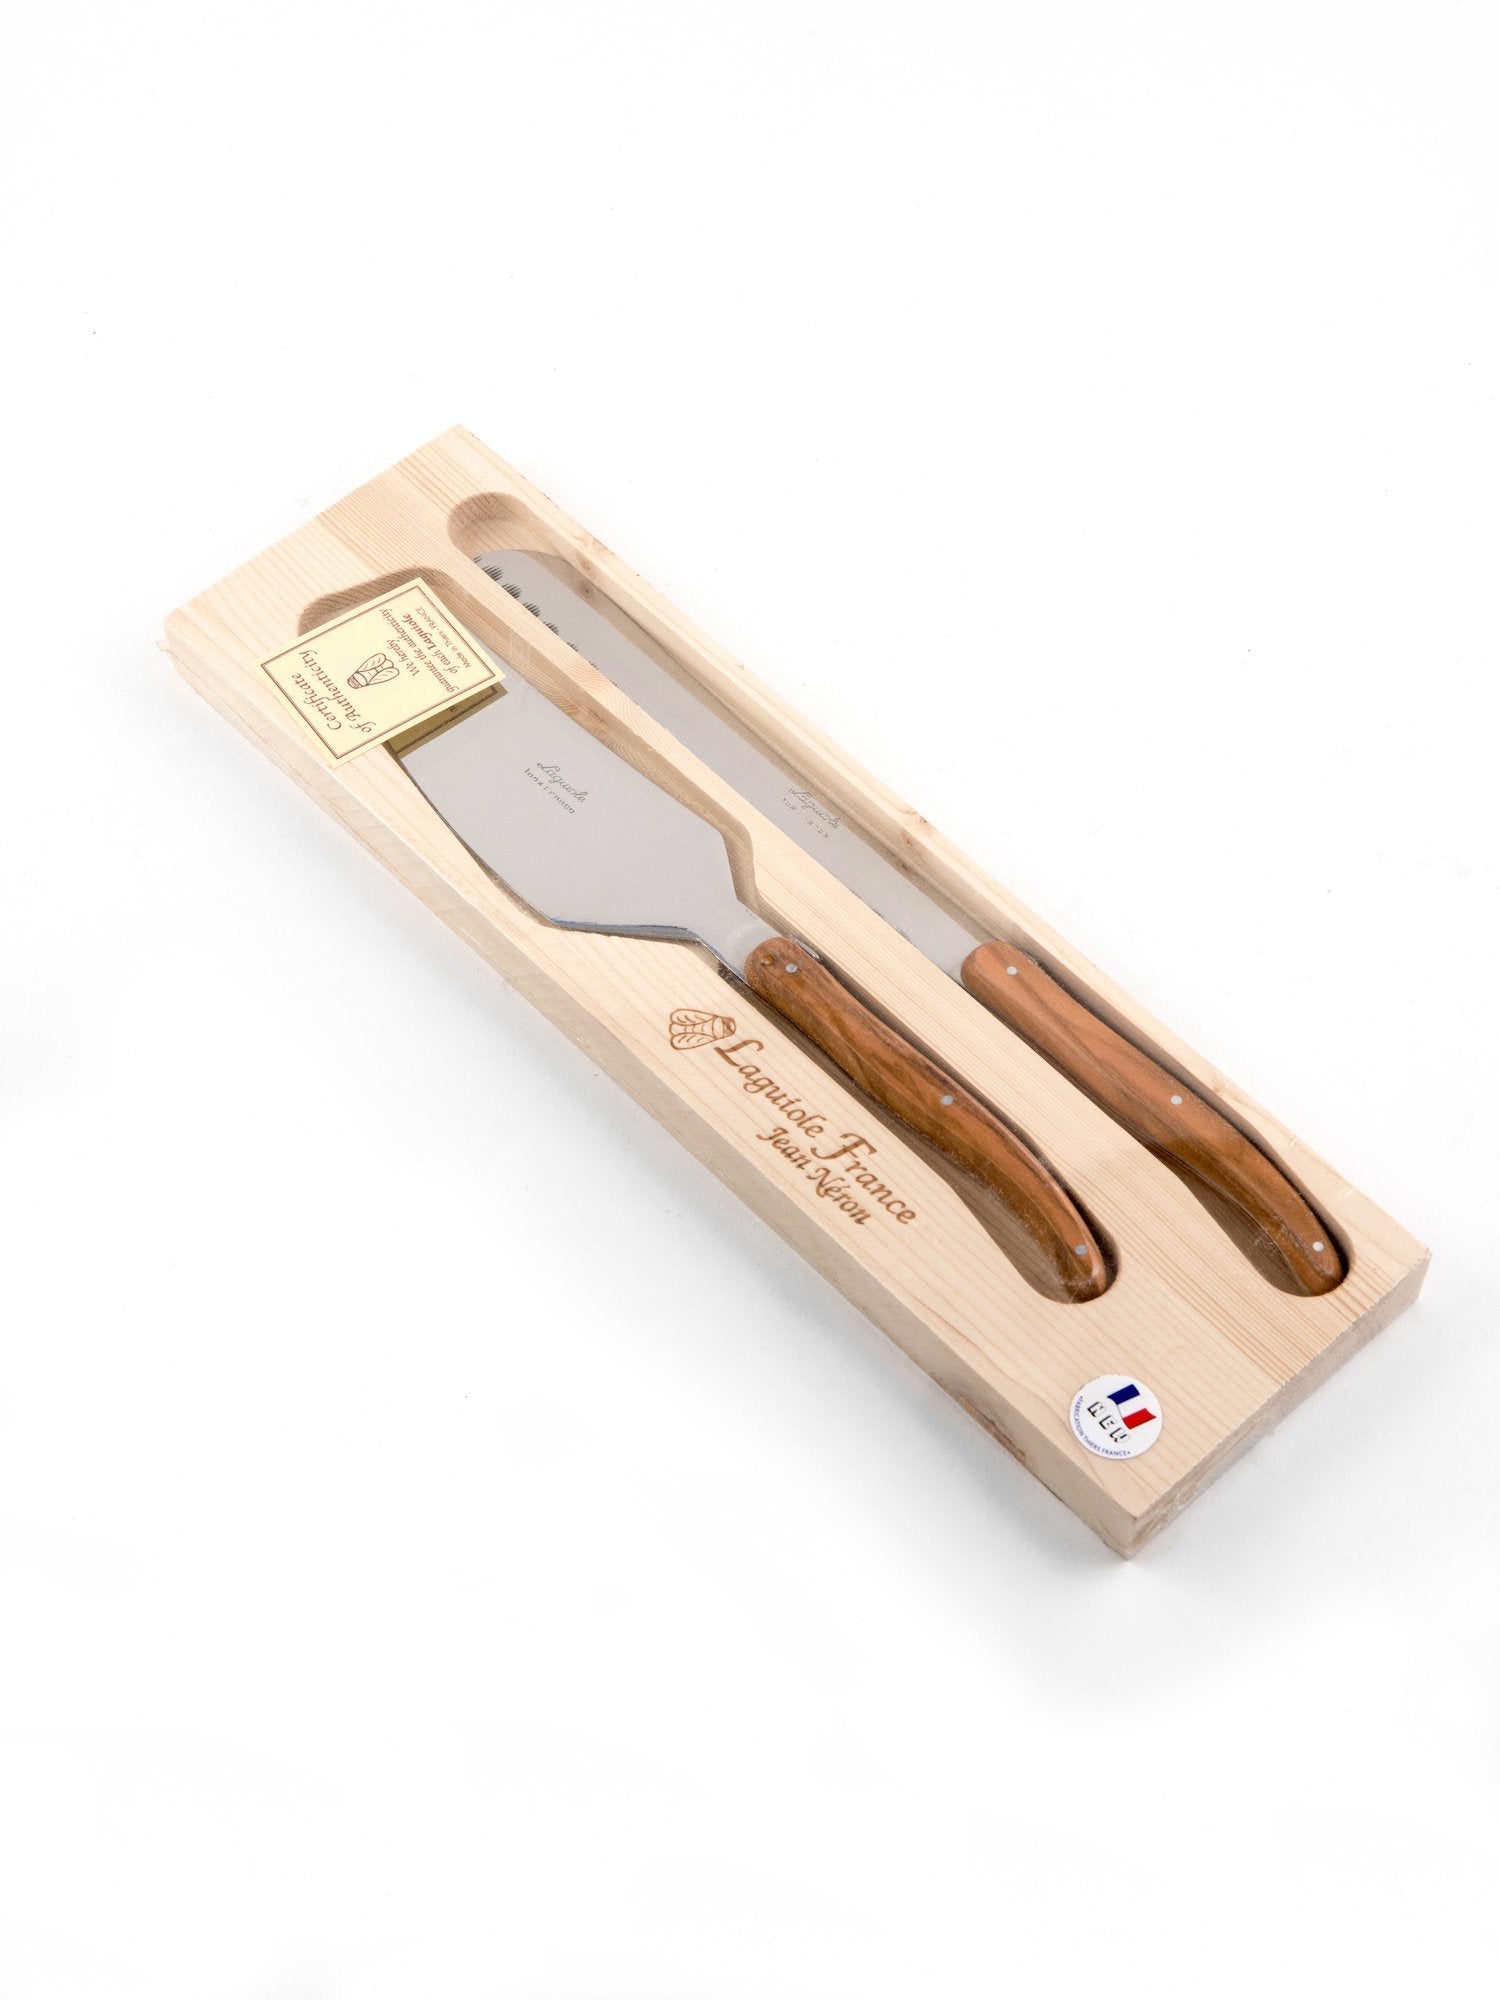 Laguiole French Olivewood Cake Set in Wood Box (Cake Slicer and Bread Knife) - French Dry Goods